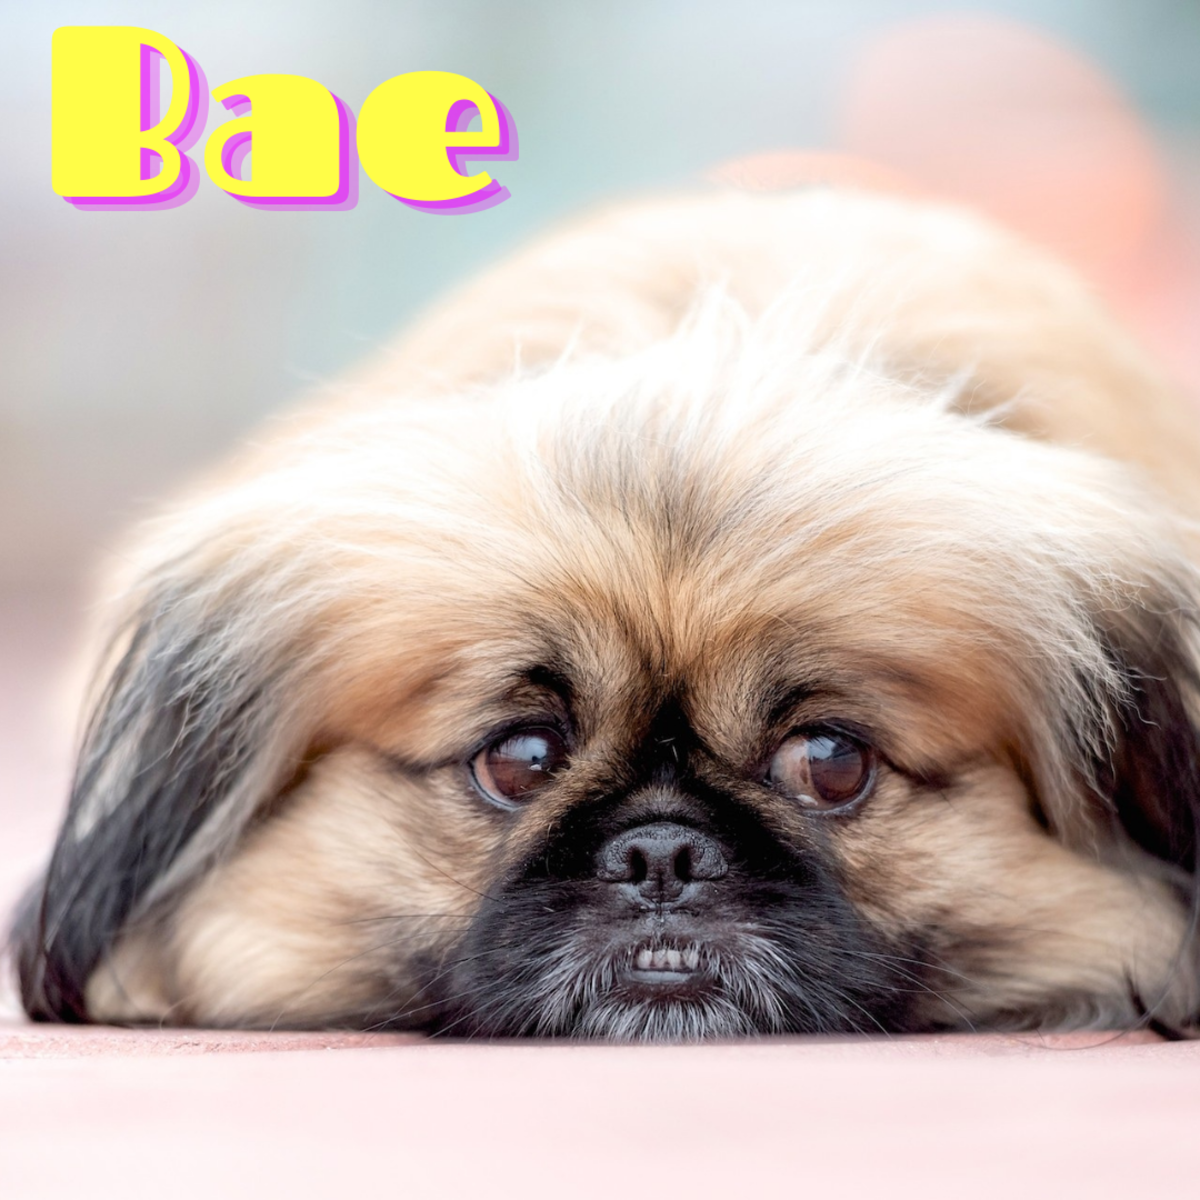 Choose a name like Bae for your little dog.